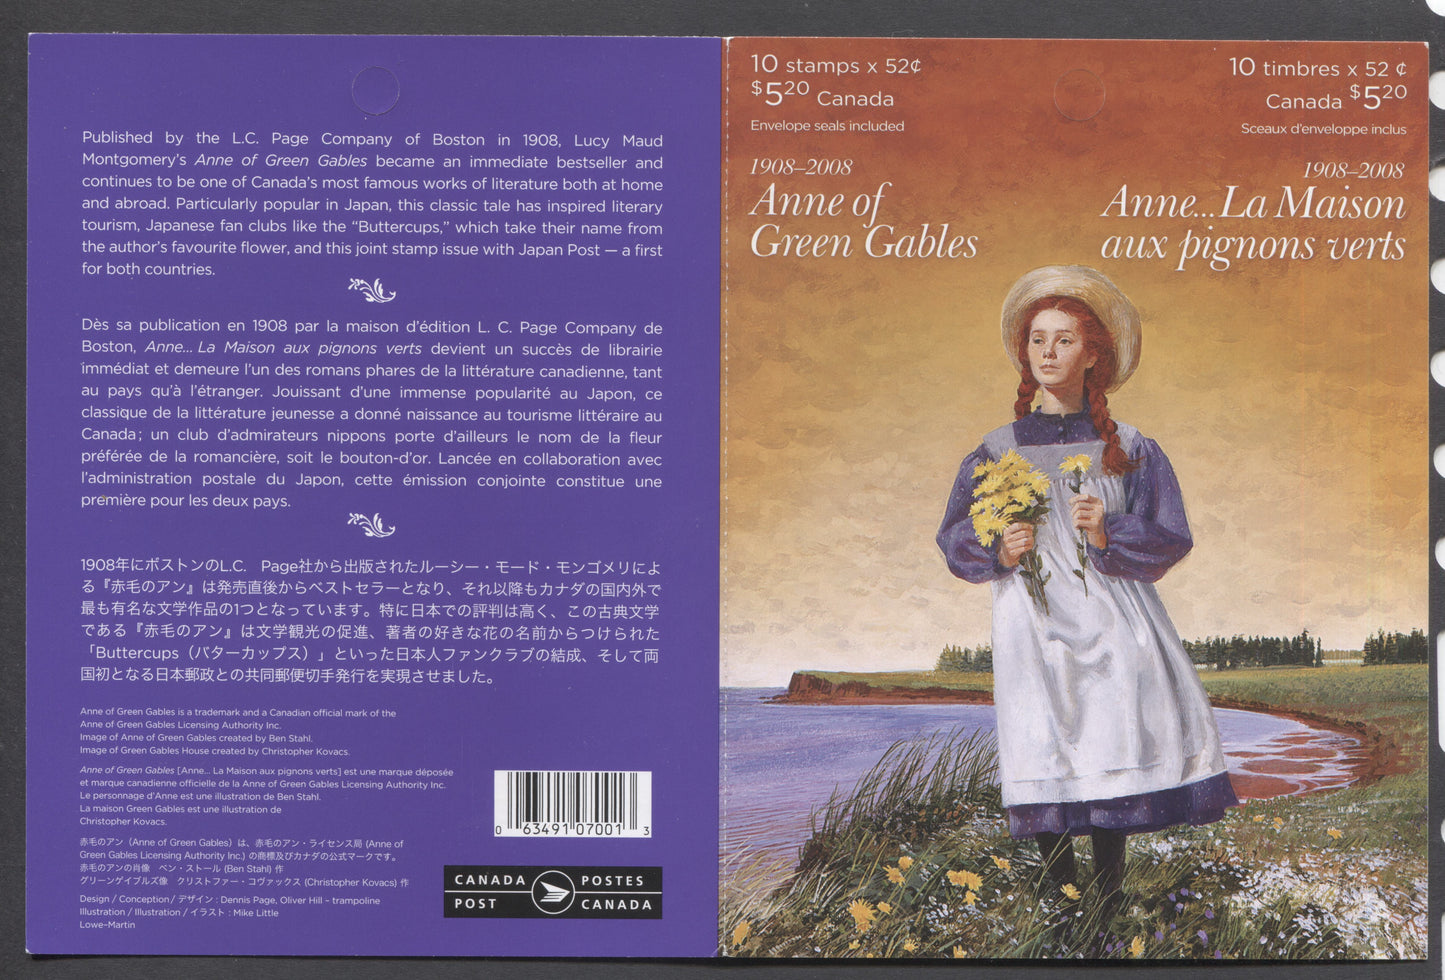 Canada #BK380 2008 Anne of Green Gables Issue, Complete $5.20 Booklet, Tullis Russell Coatings Paper, Dead Paper, 4 mm GT-4 Tagging